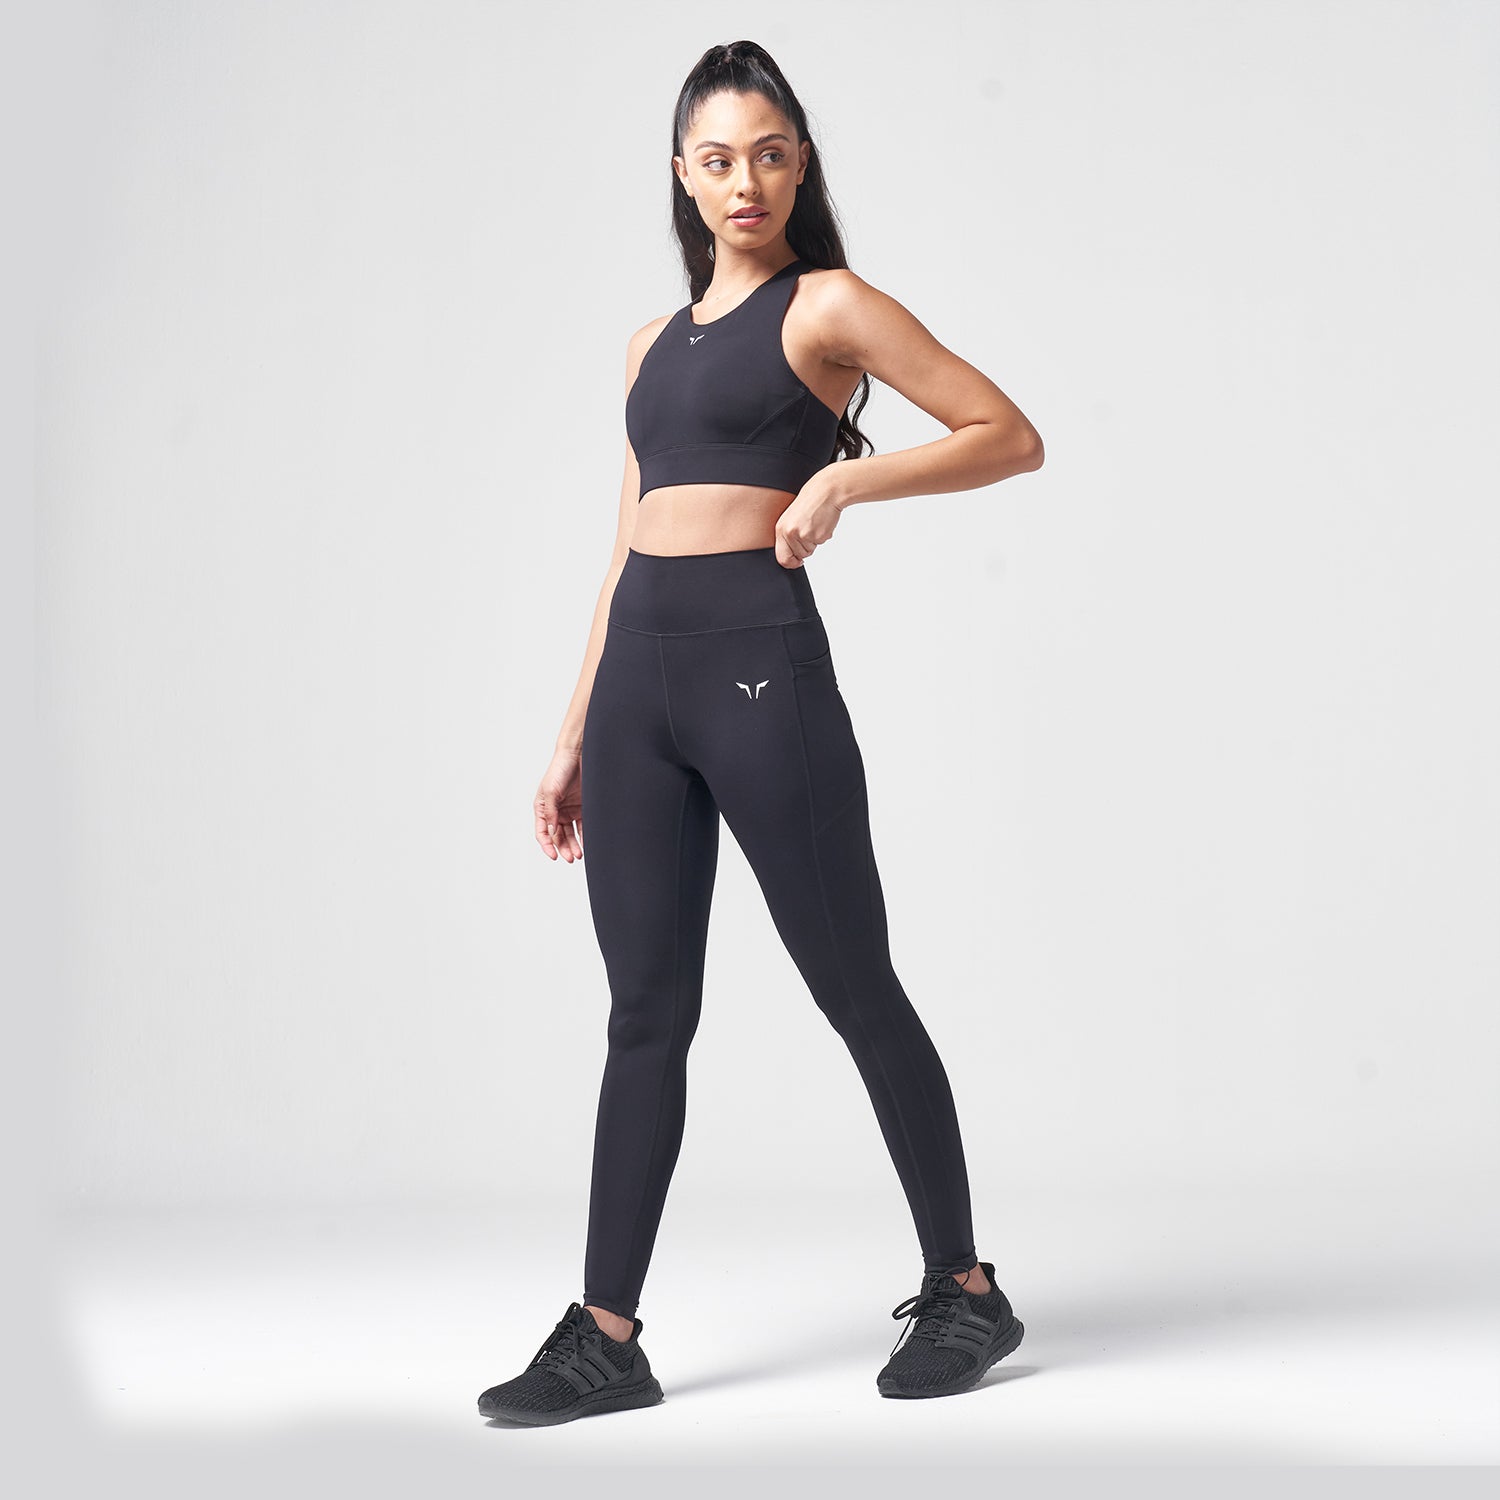 squatwolf-workout-clothes-essential-high-waisted-leggings-black-gym-leggings-for-women